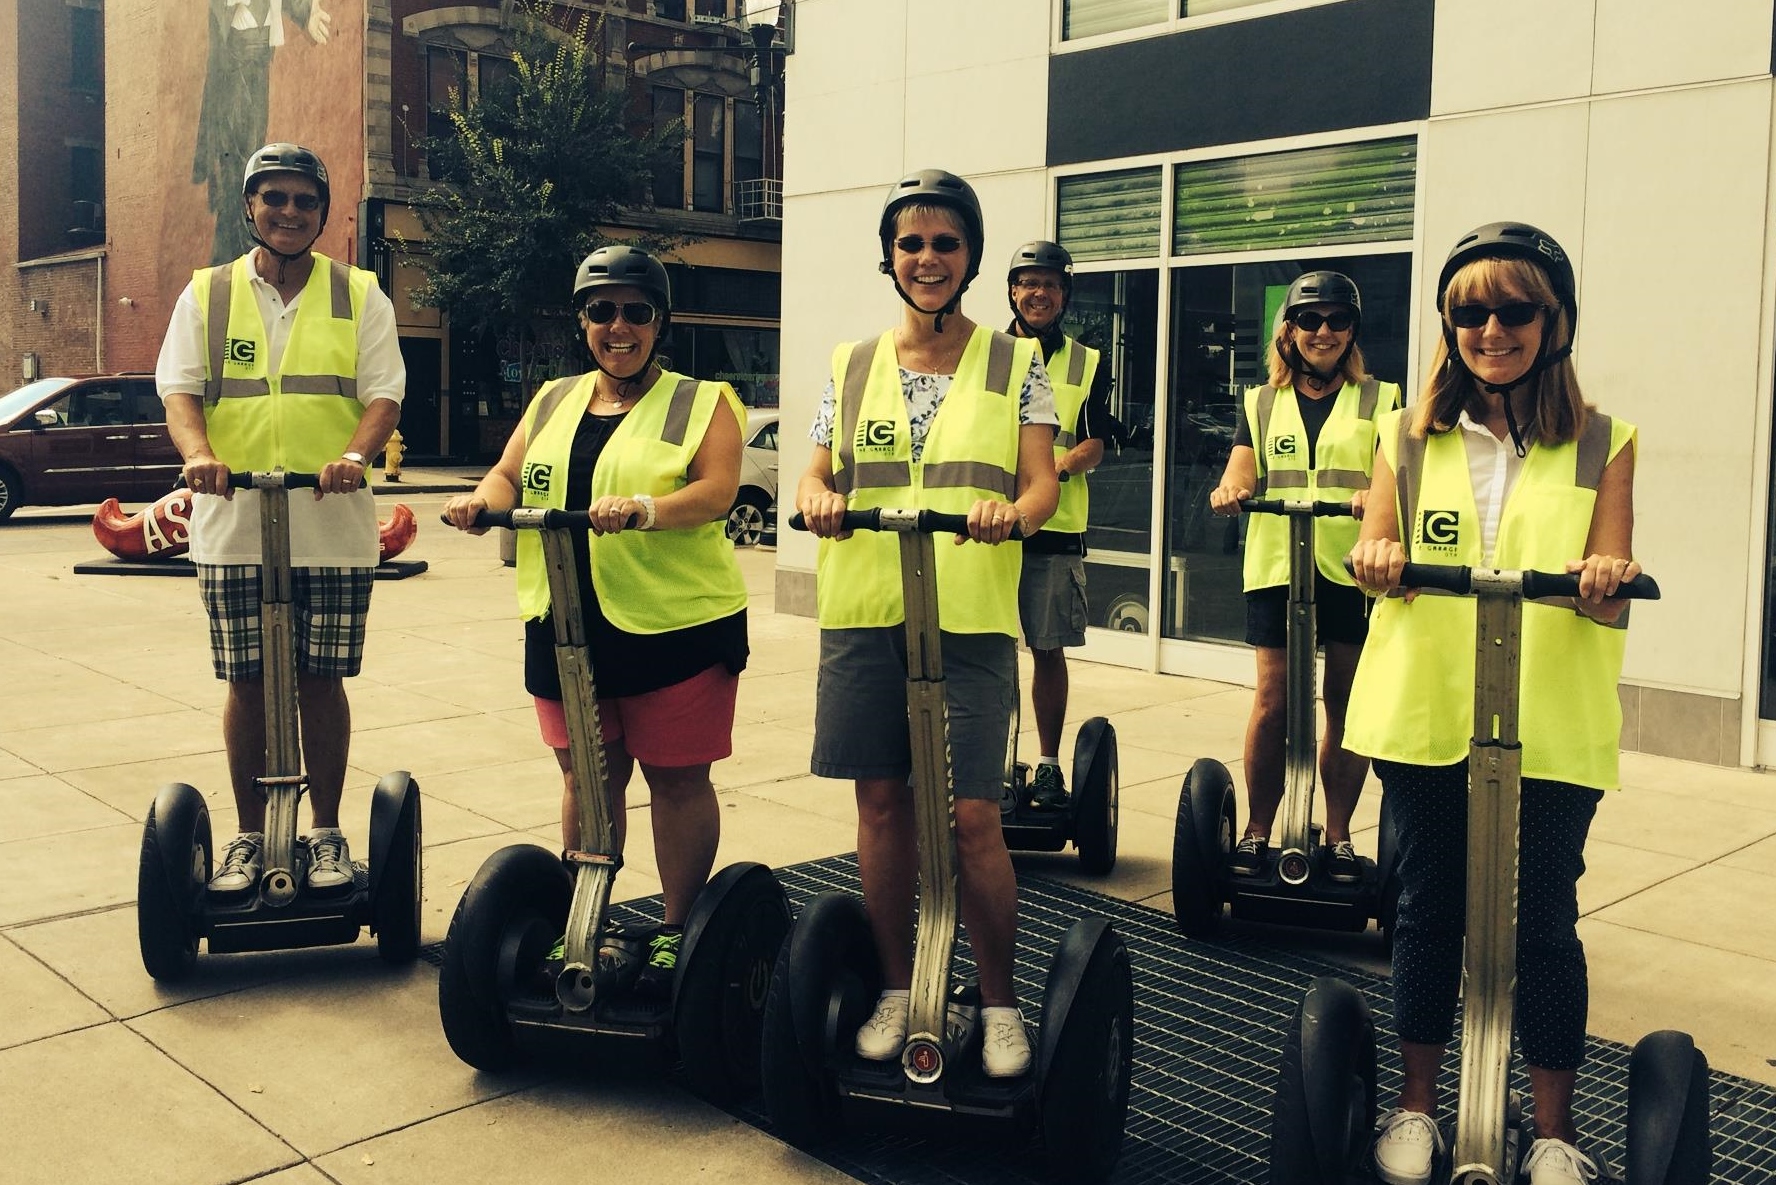 Segway Cincinnati will use its grant funds to create a new guided tour of downtown public art